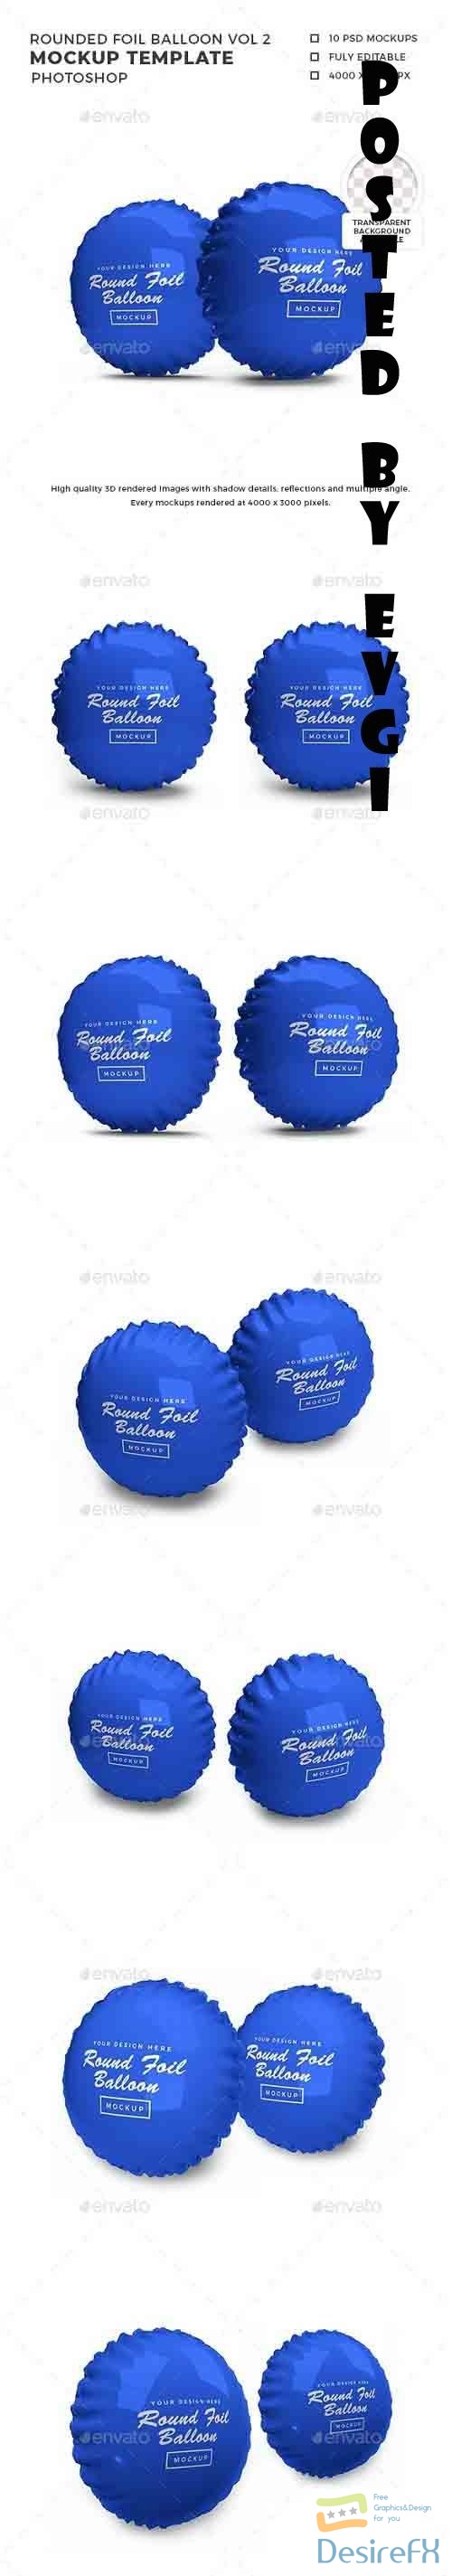 Rounded Foil Balloon 3D Mockup Template Vol 2 - 32557867